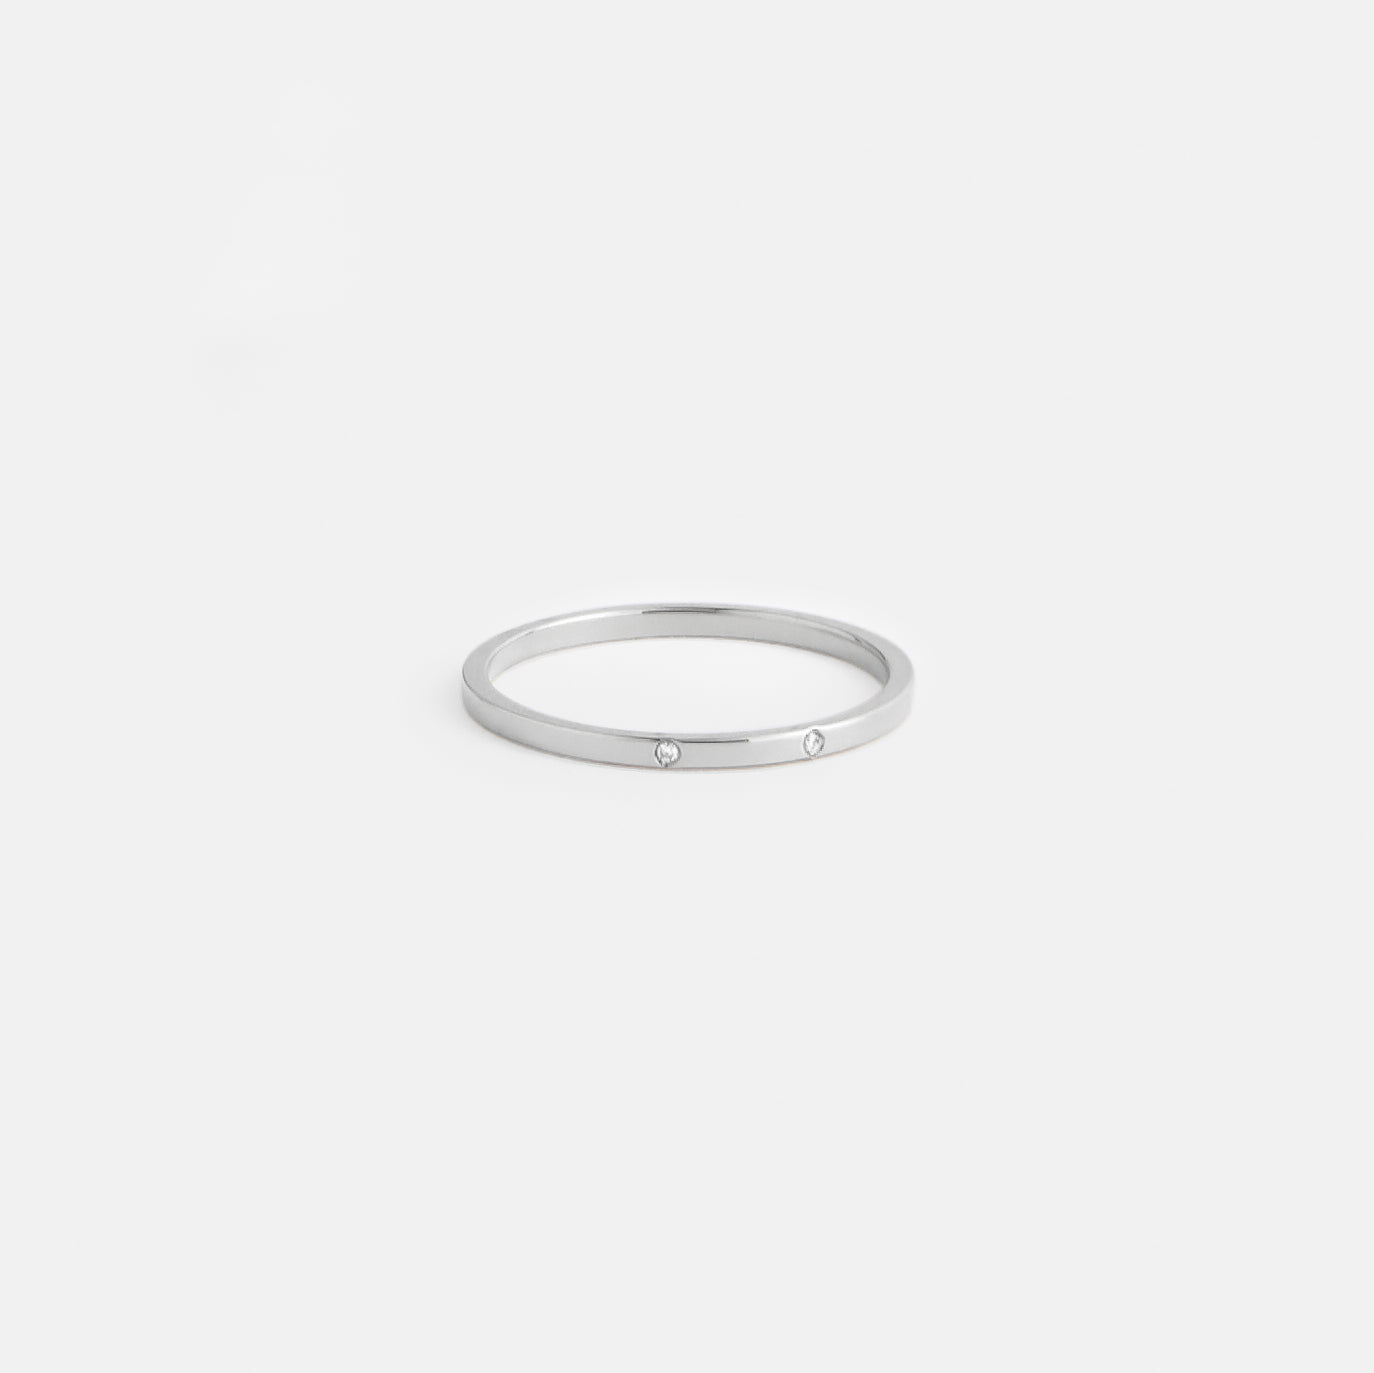 Sarala MInimalist Ring in Sterling Silver set with White Diamonds By SHW Fine Jewelry NYC